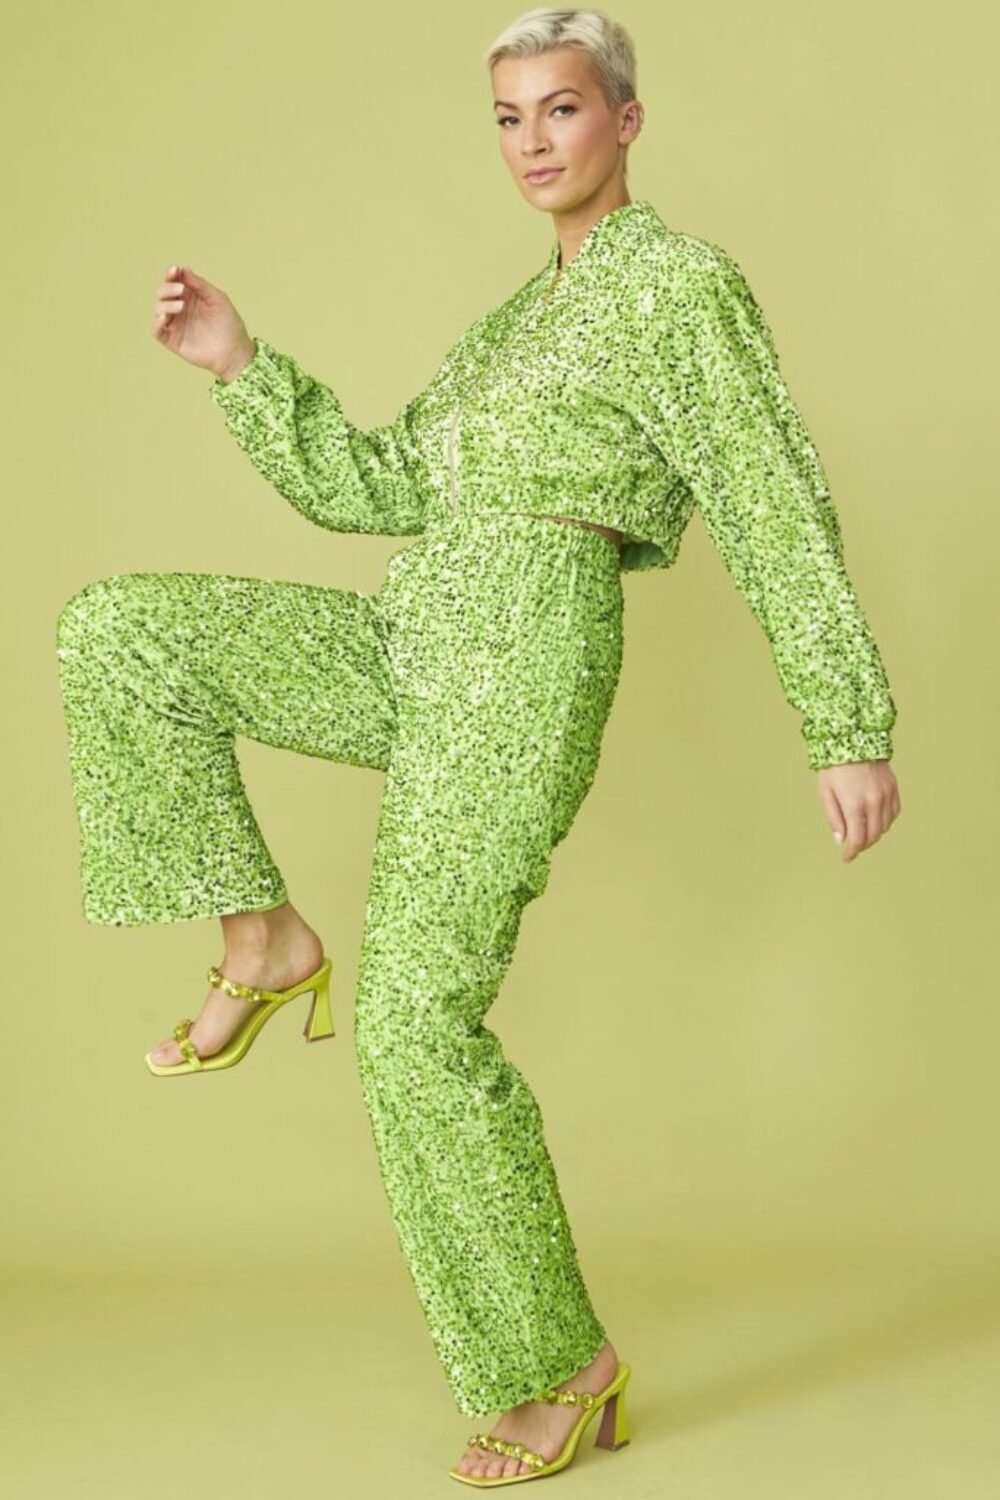 Shop Green Sequin Trousers with Elasticated Waist and women's luxury and designer clothes at www.lux-apparel.co.uk